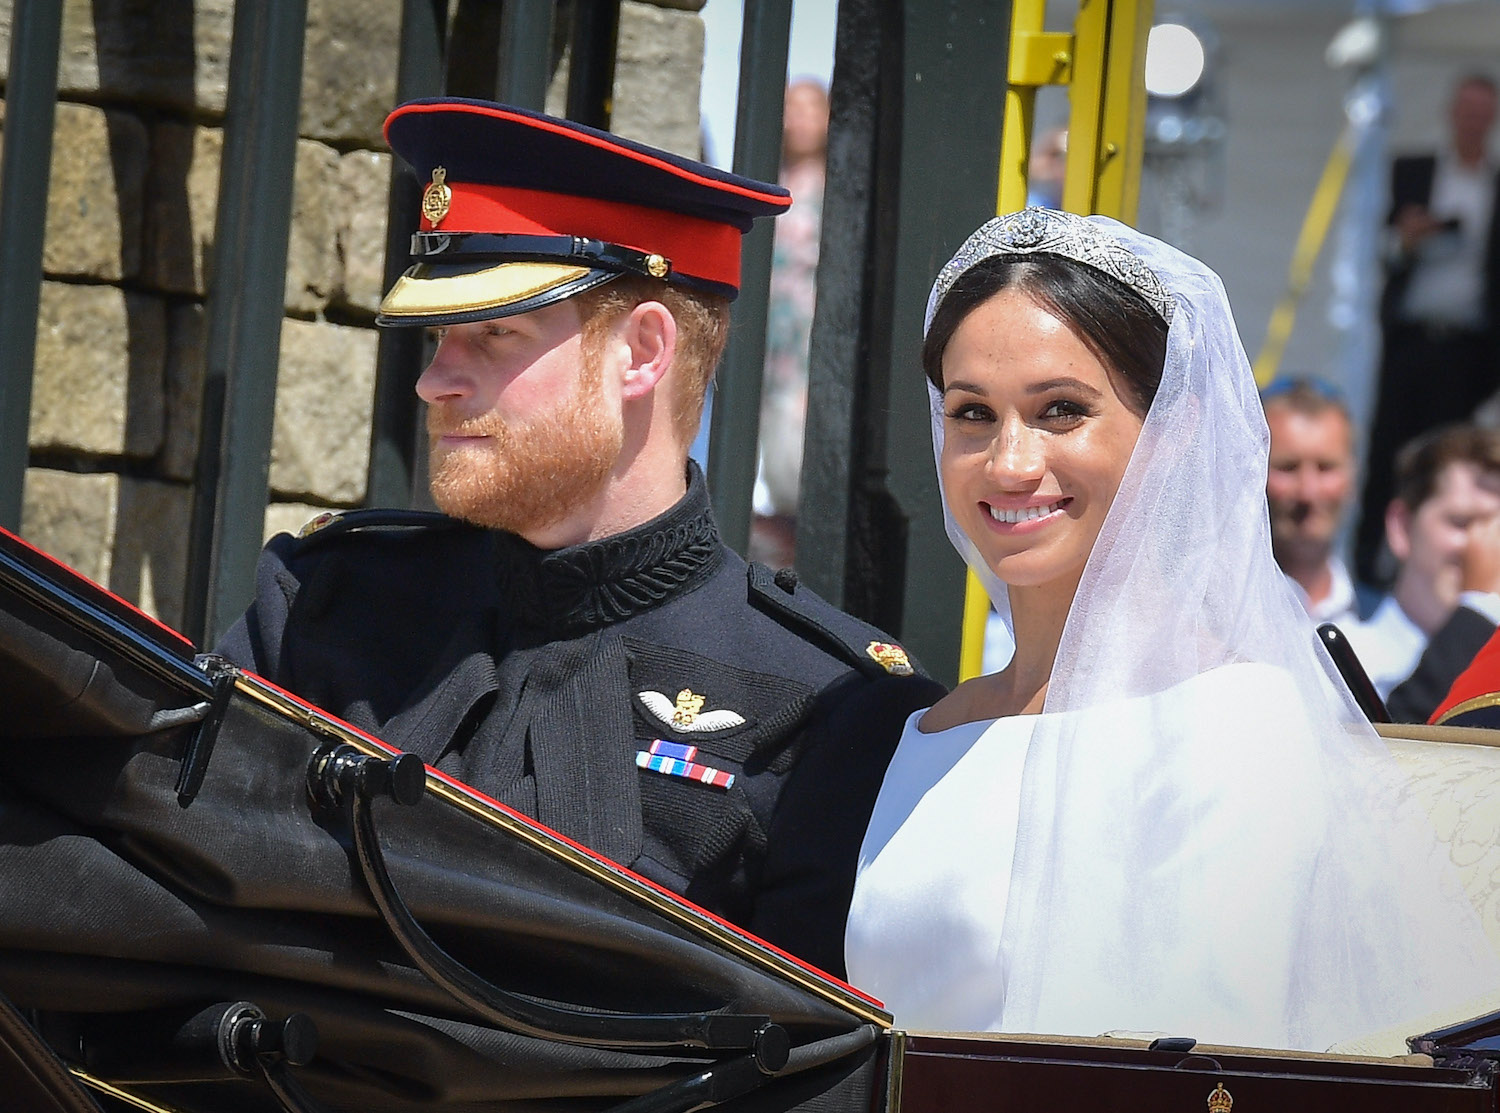 Prince Harry and Meghan Markle leave Windsor Castle in the Ascot Landau carriage during a procession after getting married